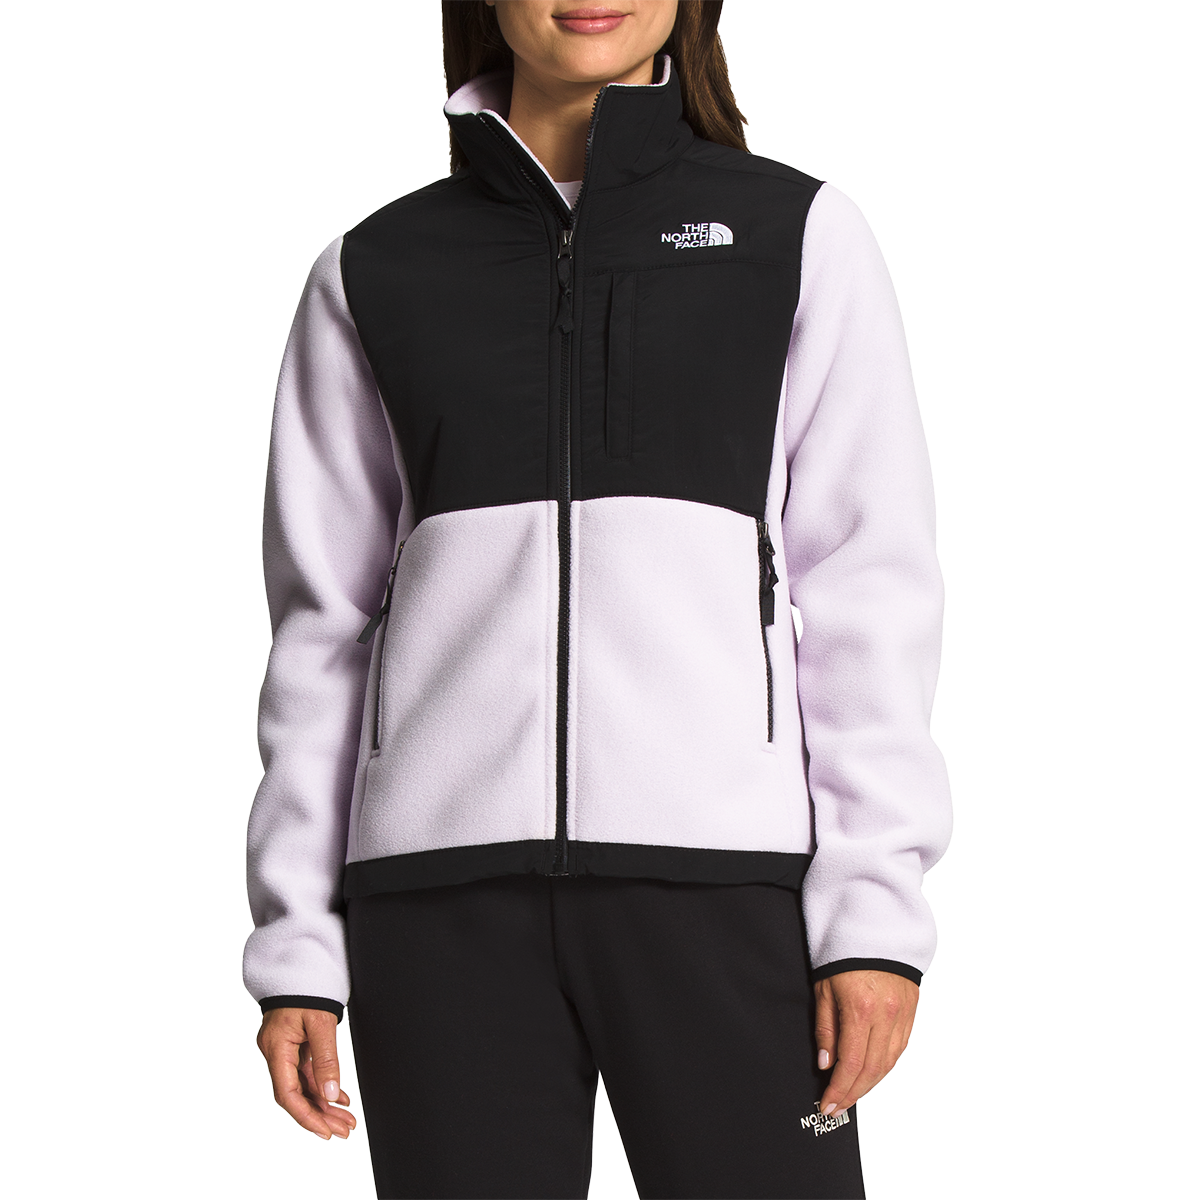 WOMEN'S DENALI HOODIE, The North Face